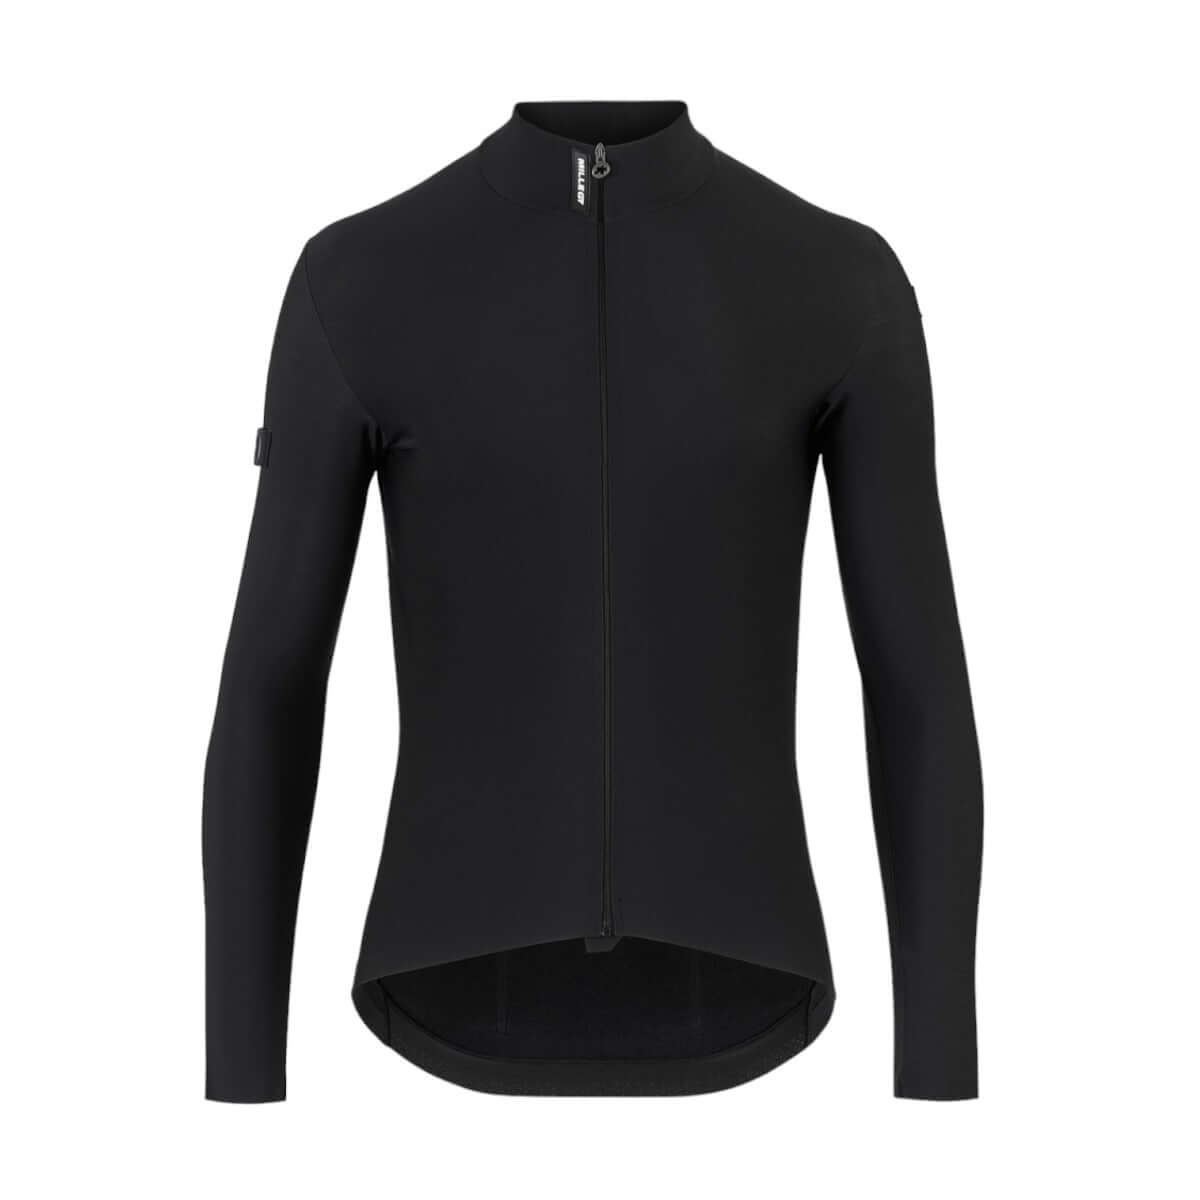 Assos of Switzerland Mille GT 2/3 LS Jersey C2 | Strictly Bicycles